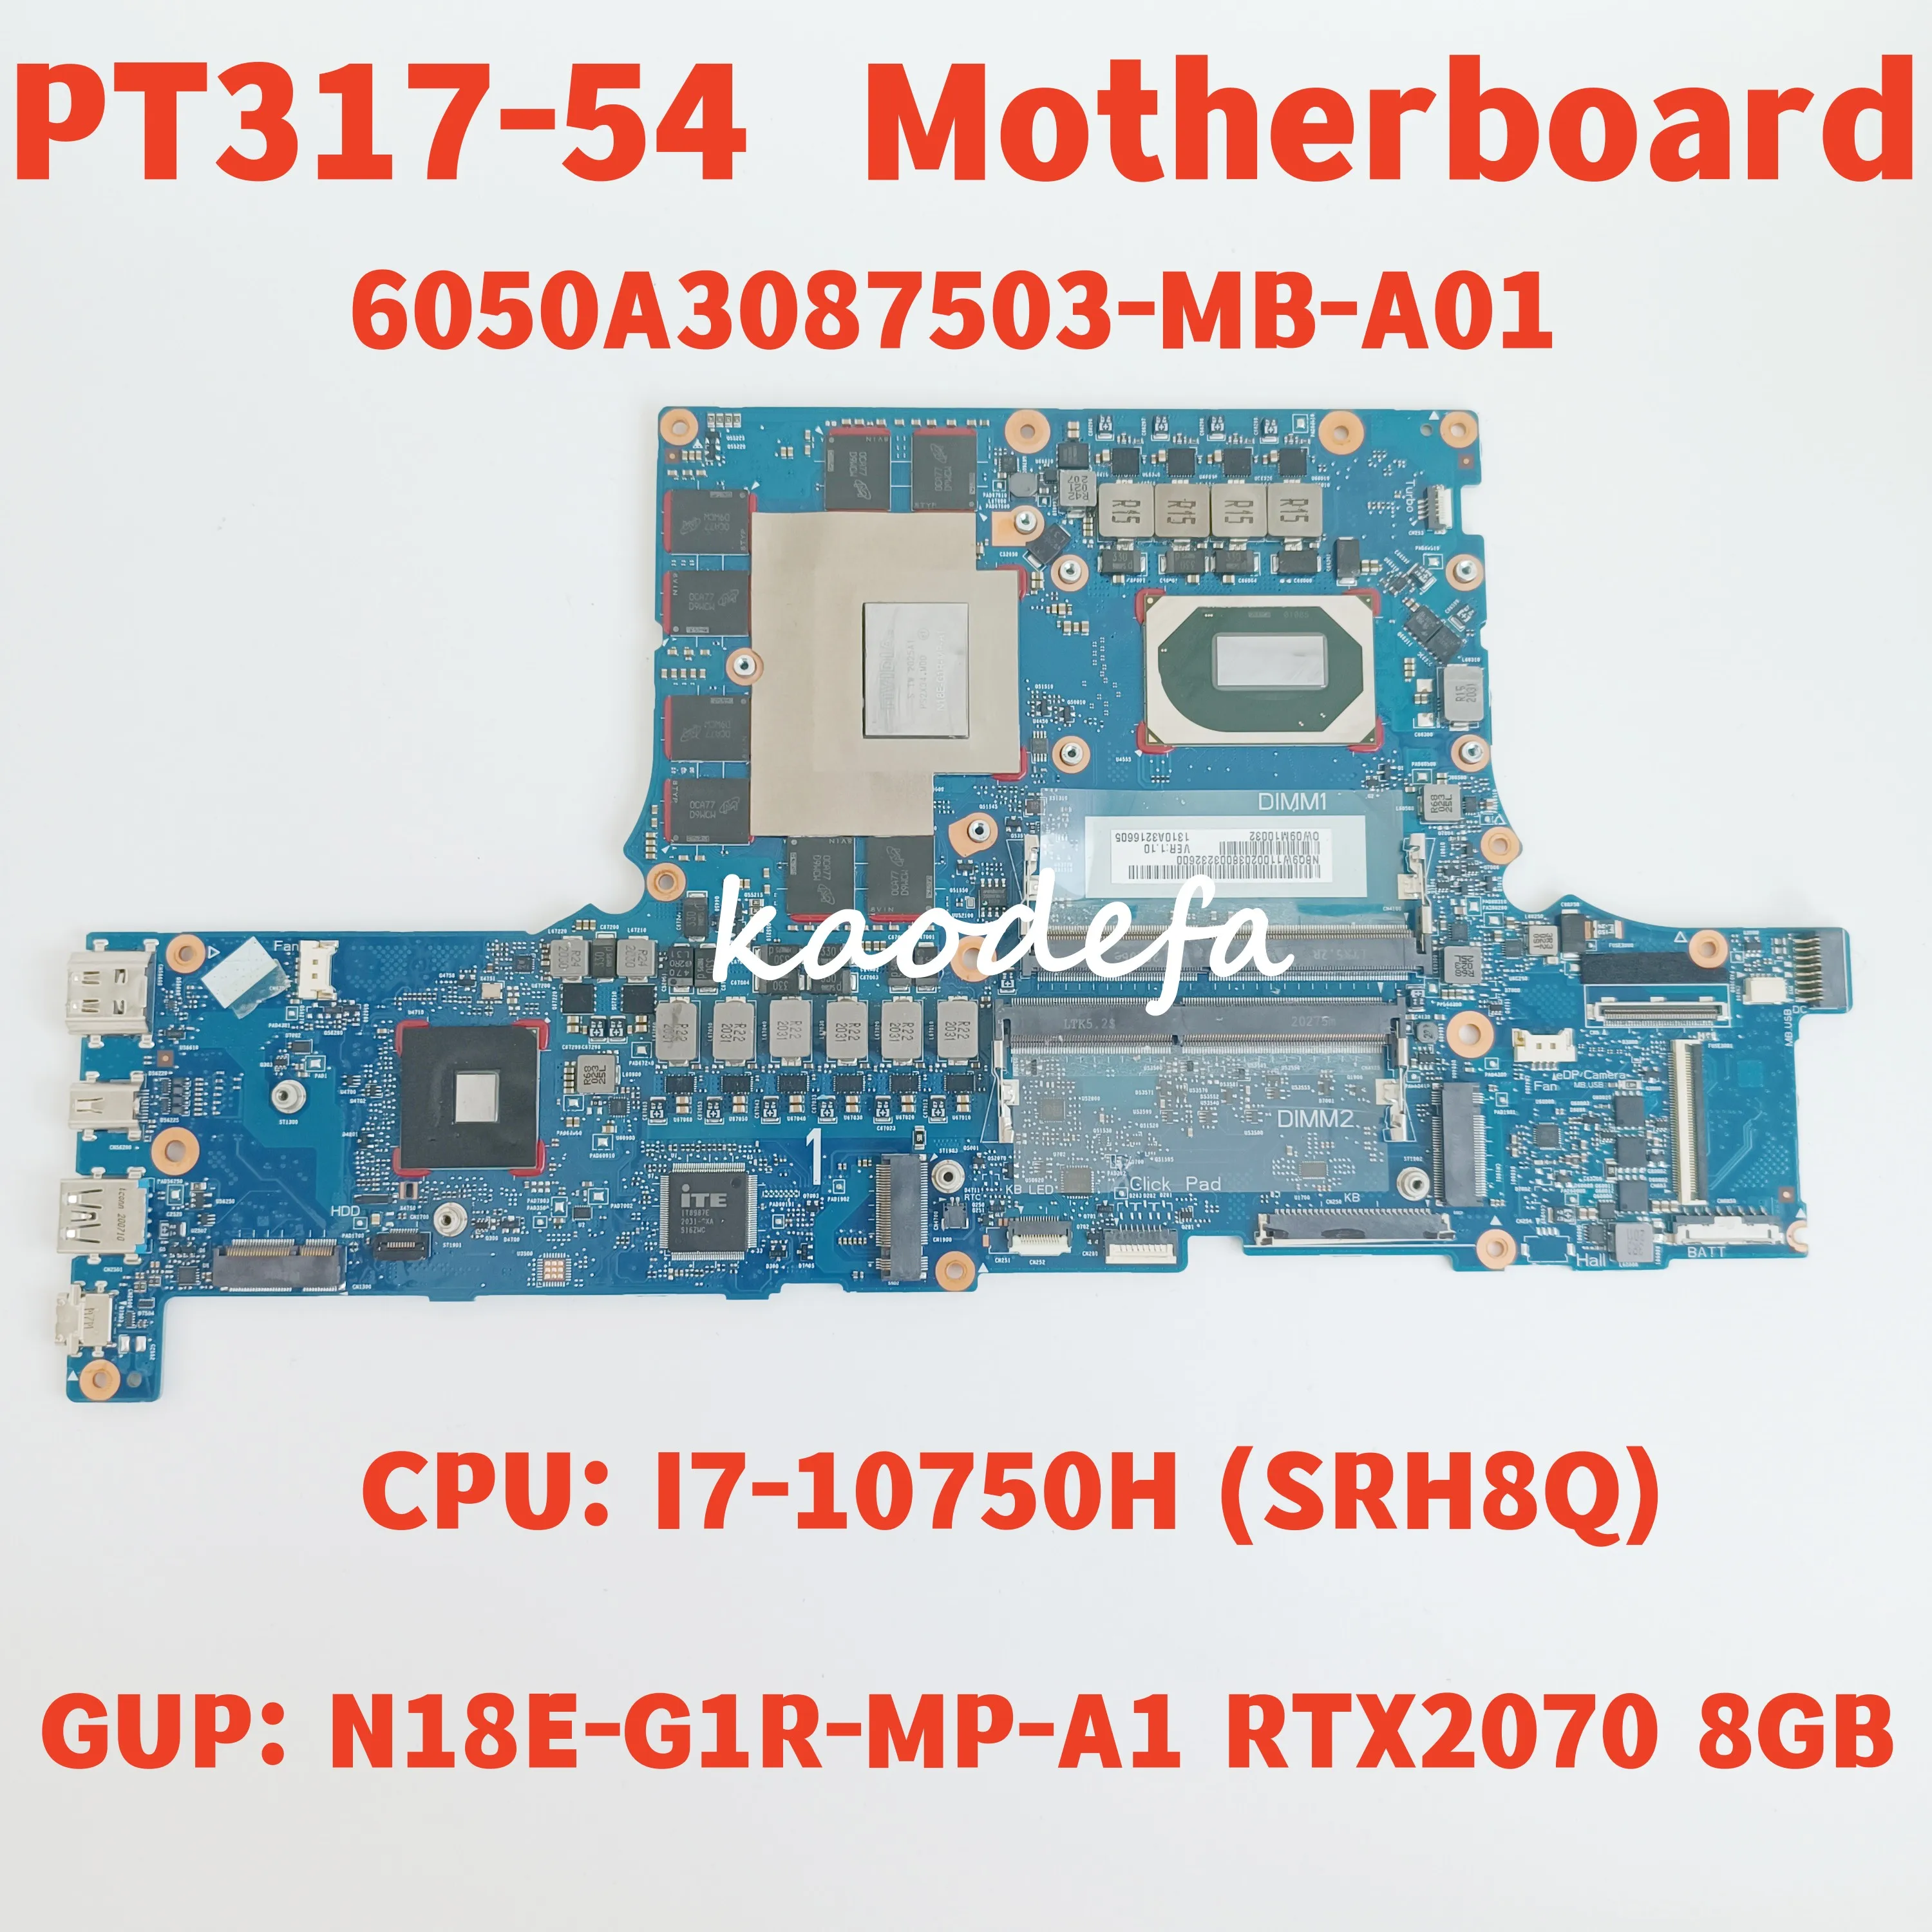 

6050A3087503-MB-A01 Mainboard For Acer PT317-54 Laptop Motherboard CPU: I7-10750H SRH8Q GUP: N18E-G1R-MP-A1 RTX2070 8GB Test OK